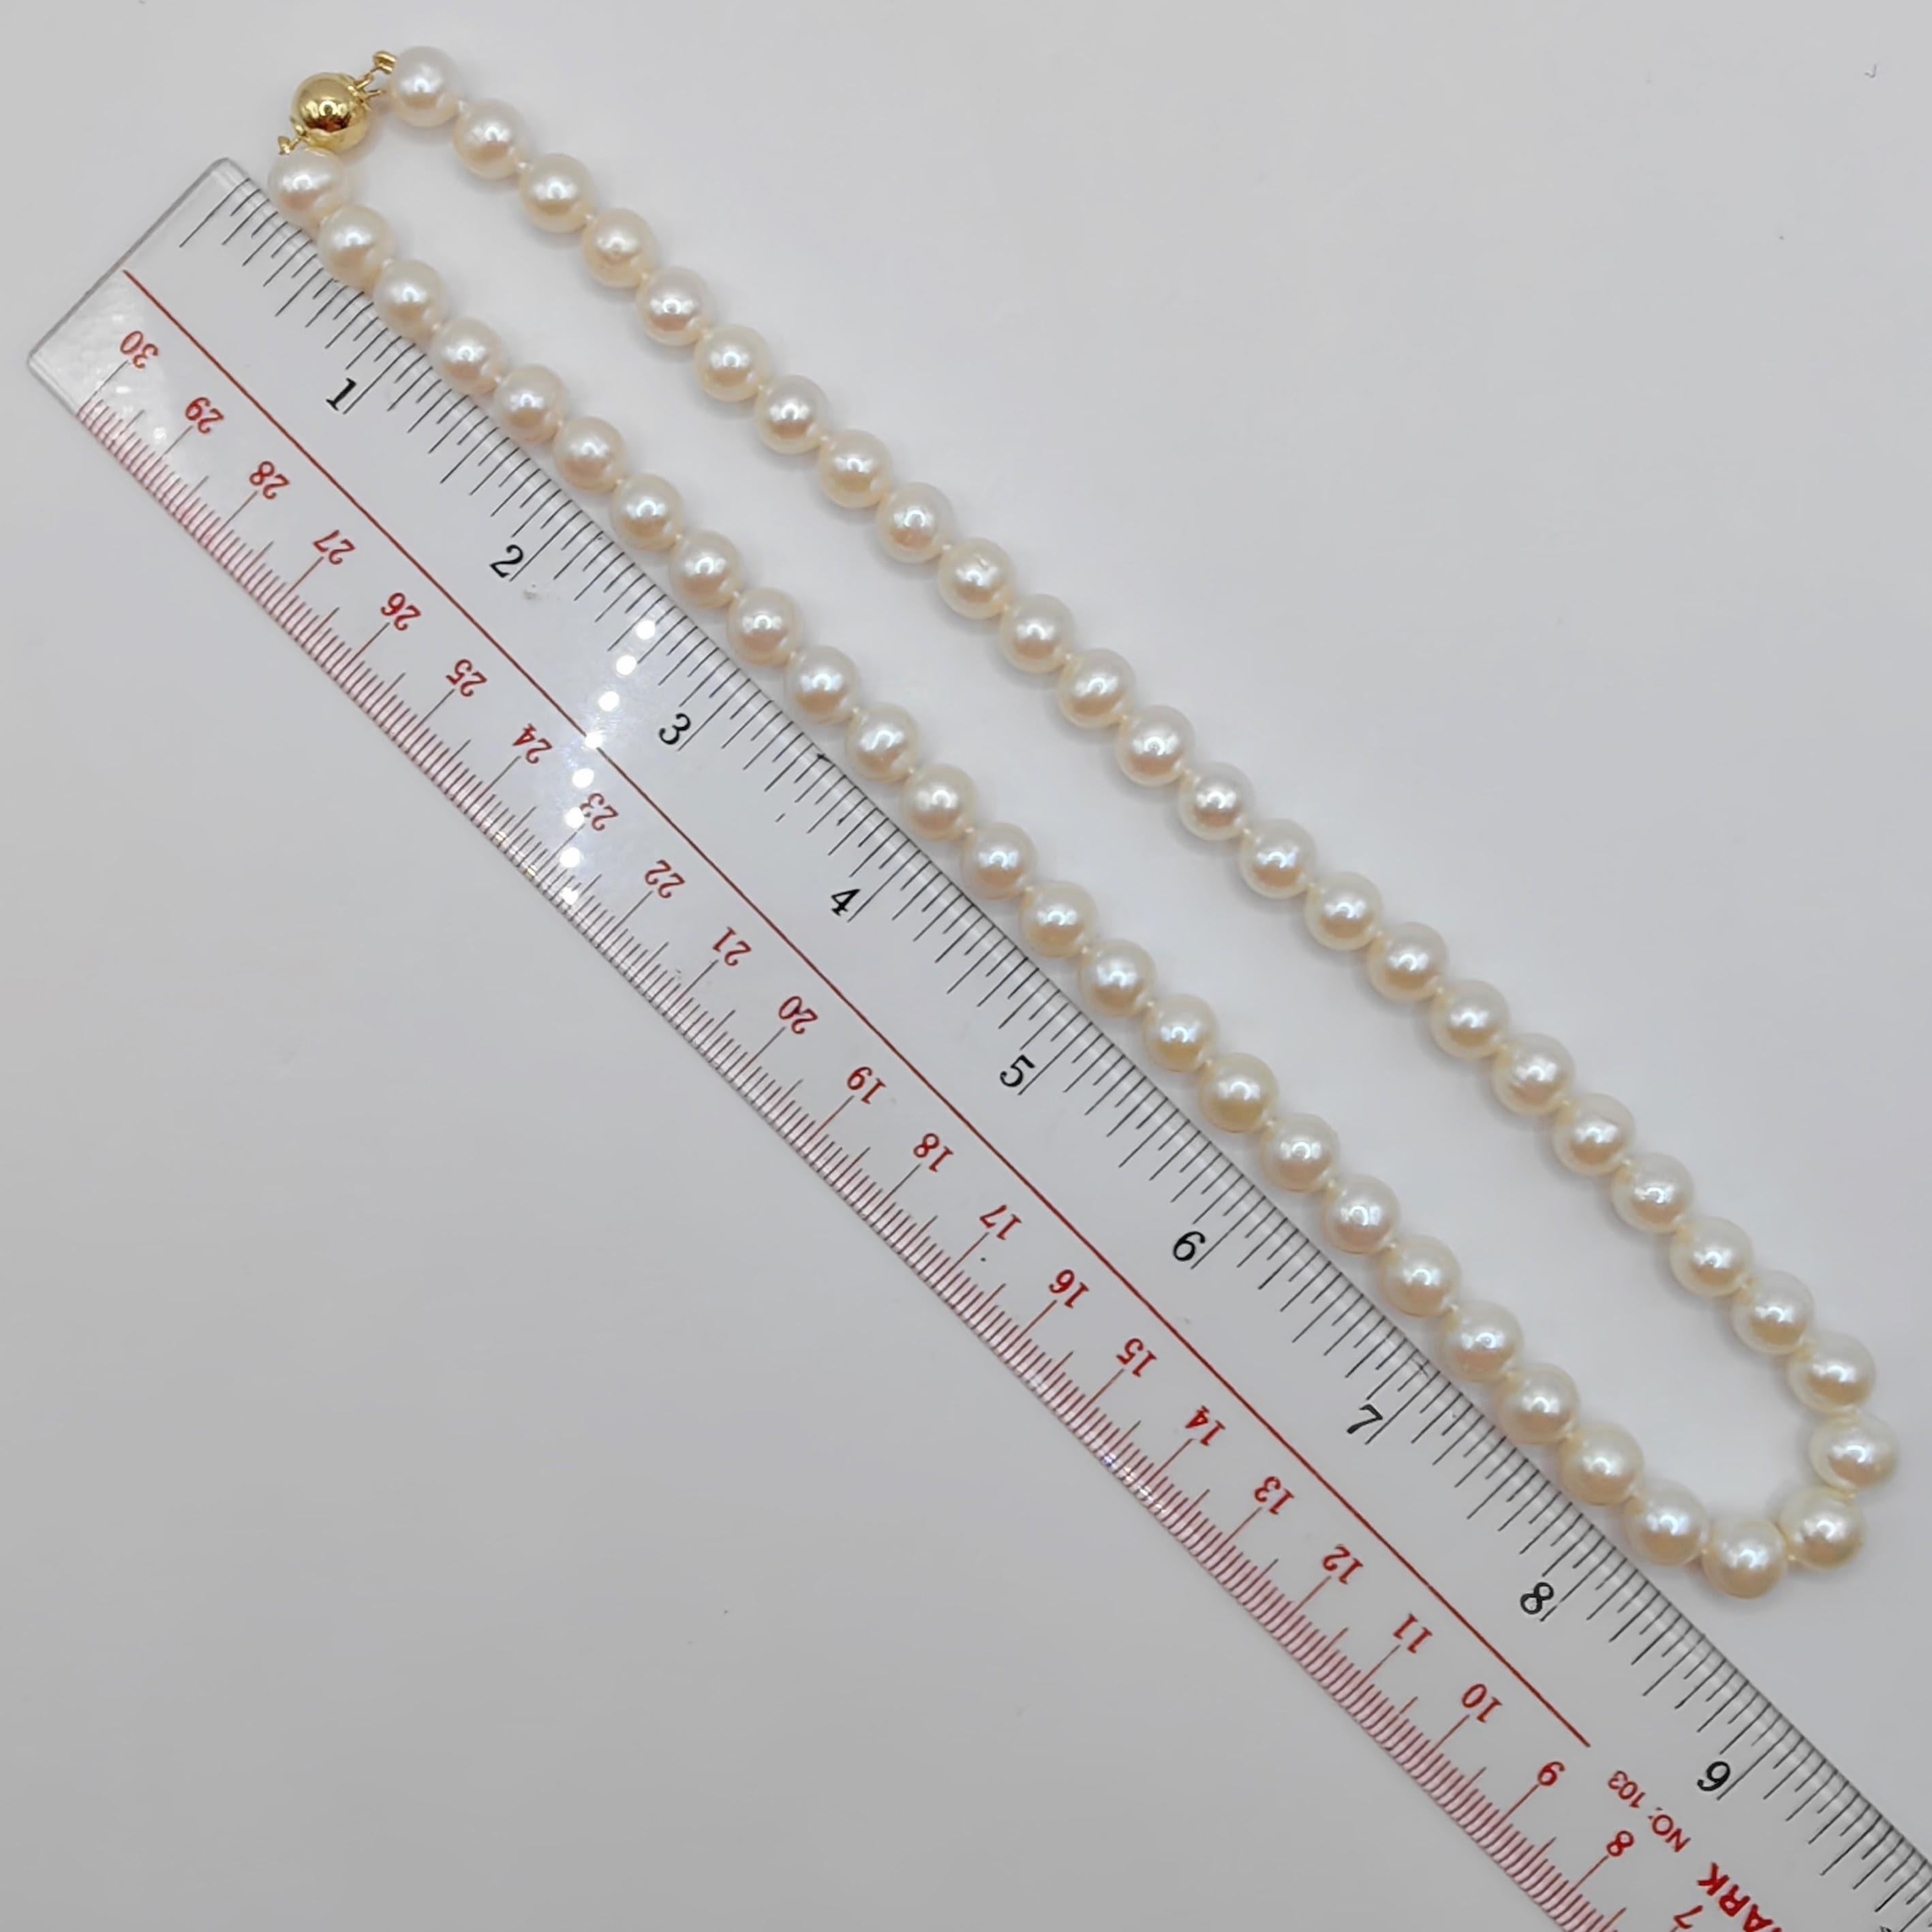 7-8mm White Round Pearl Necklace with 18K Gold Clasp For Sale 4